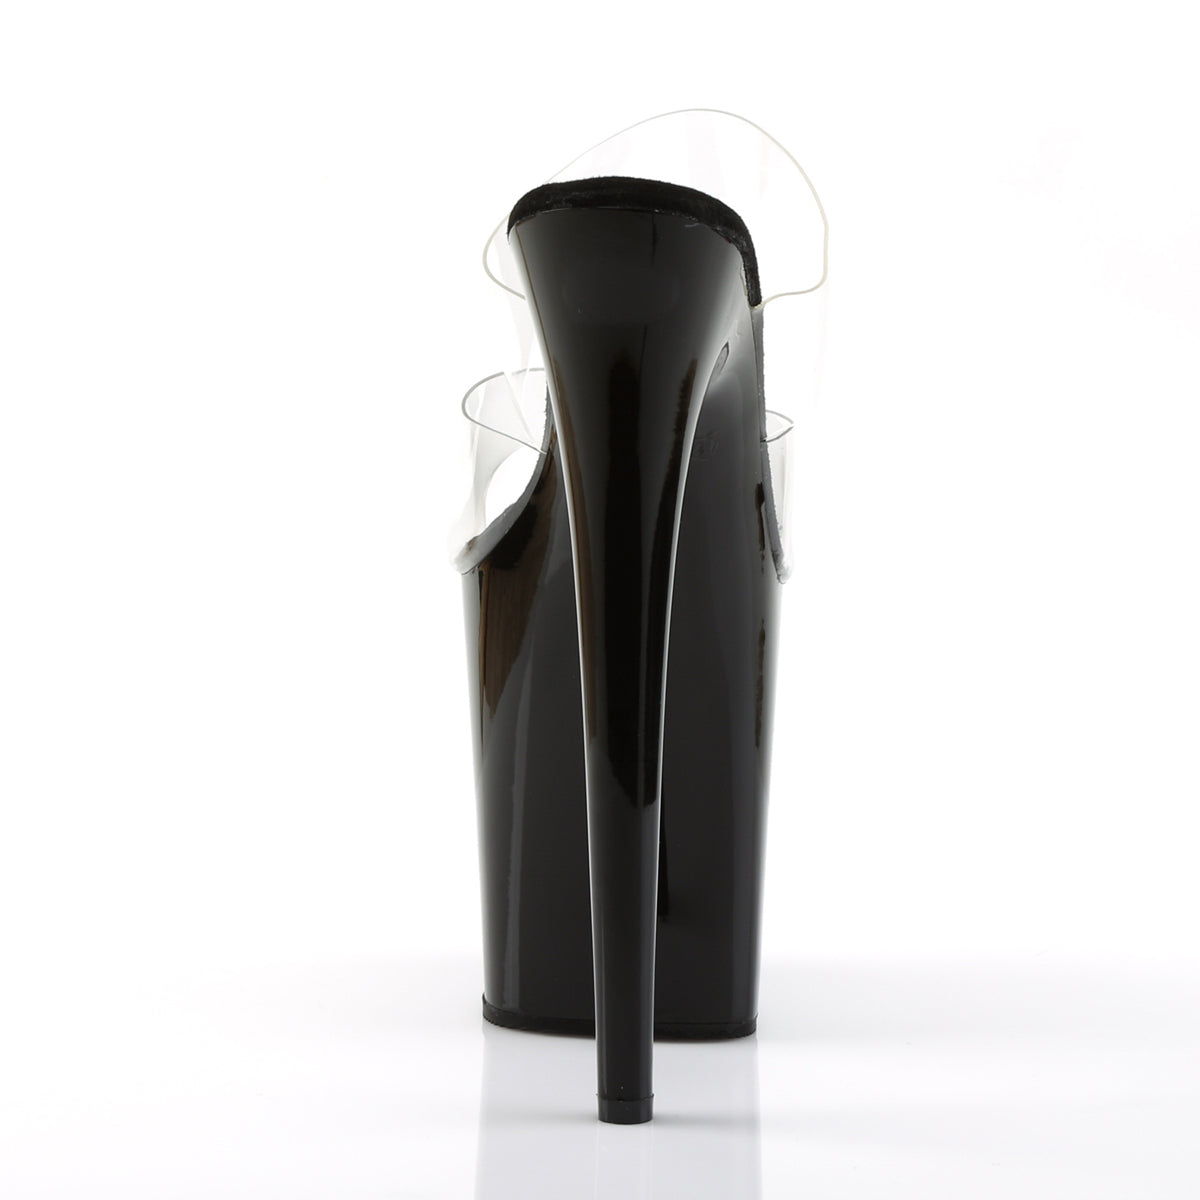 FLAMINGO-802 8" Heel Clear and Black Pole Dancing Platforms-Pleaser- Sexy Shoes Fetish Footwear